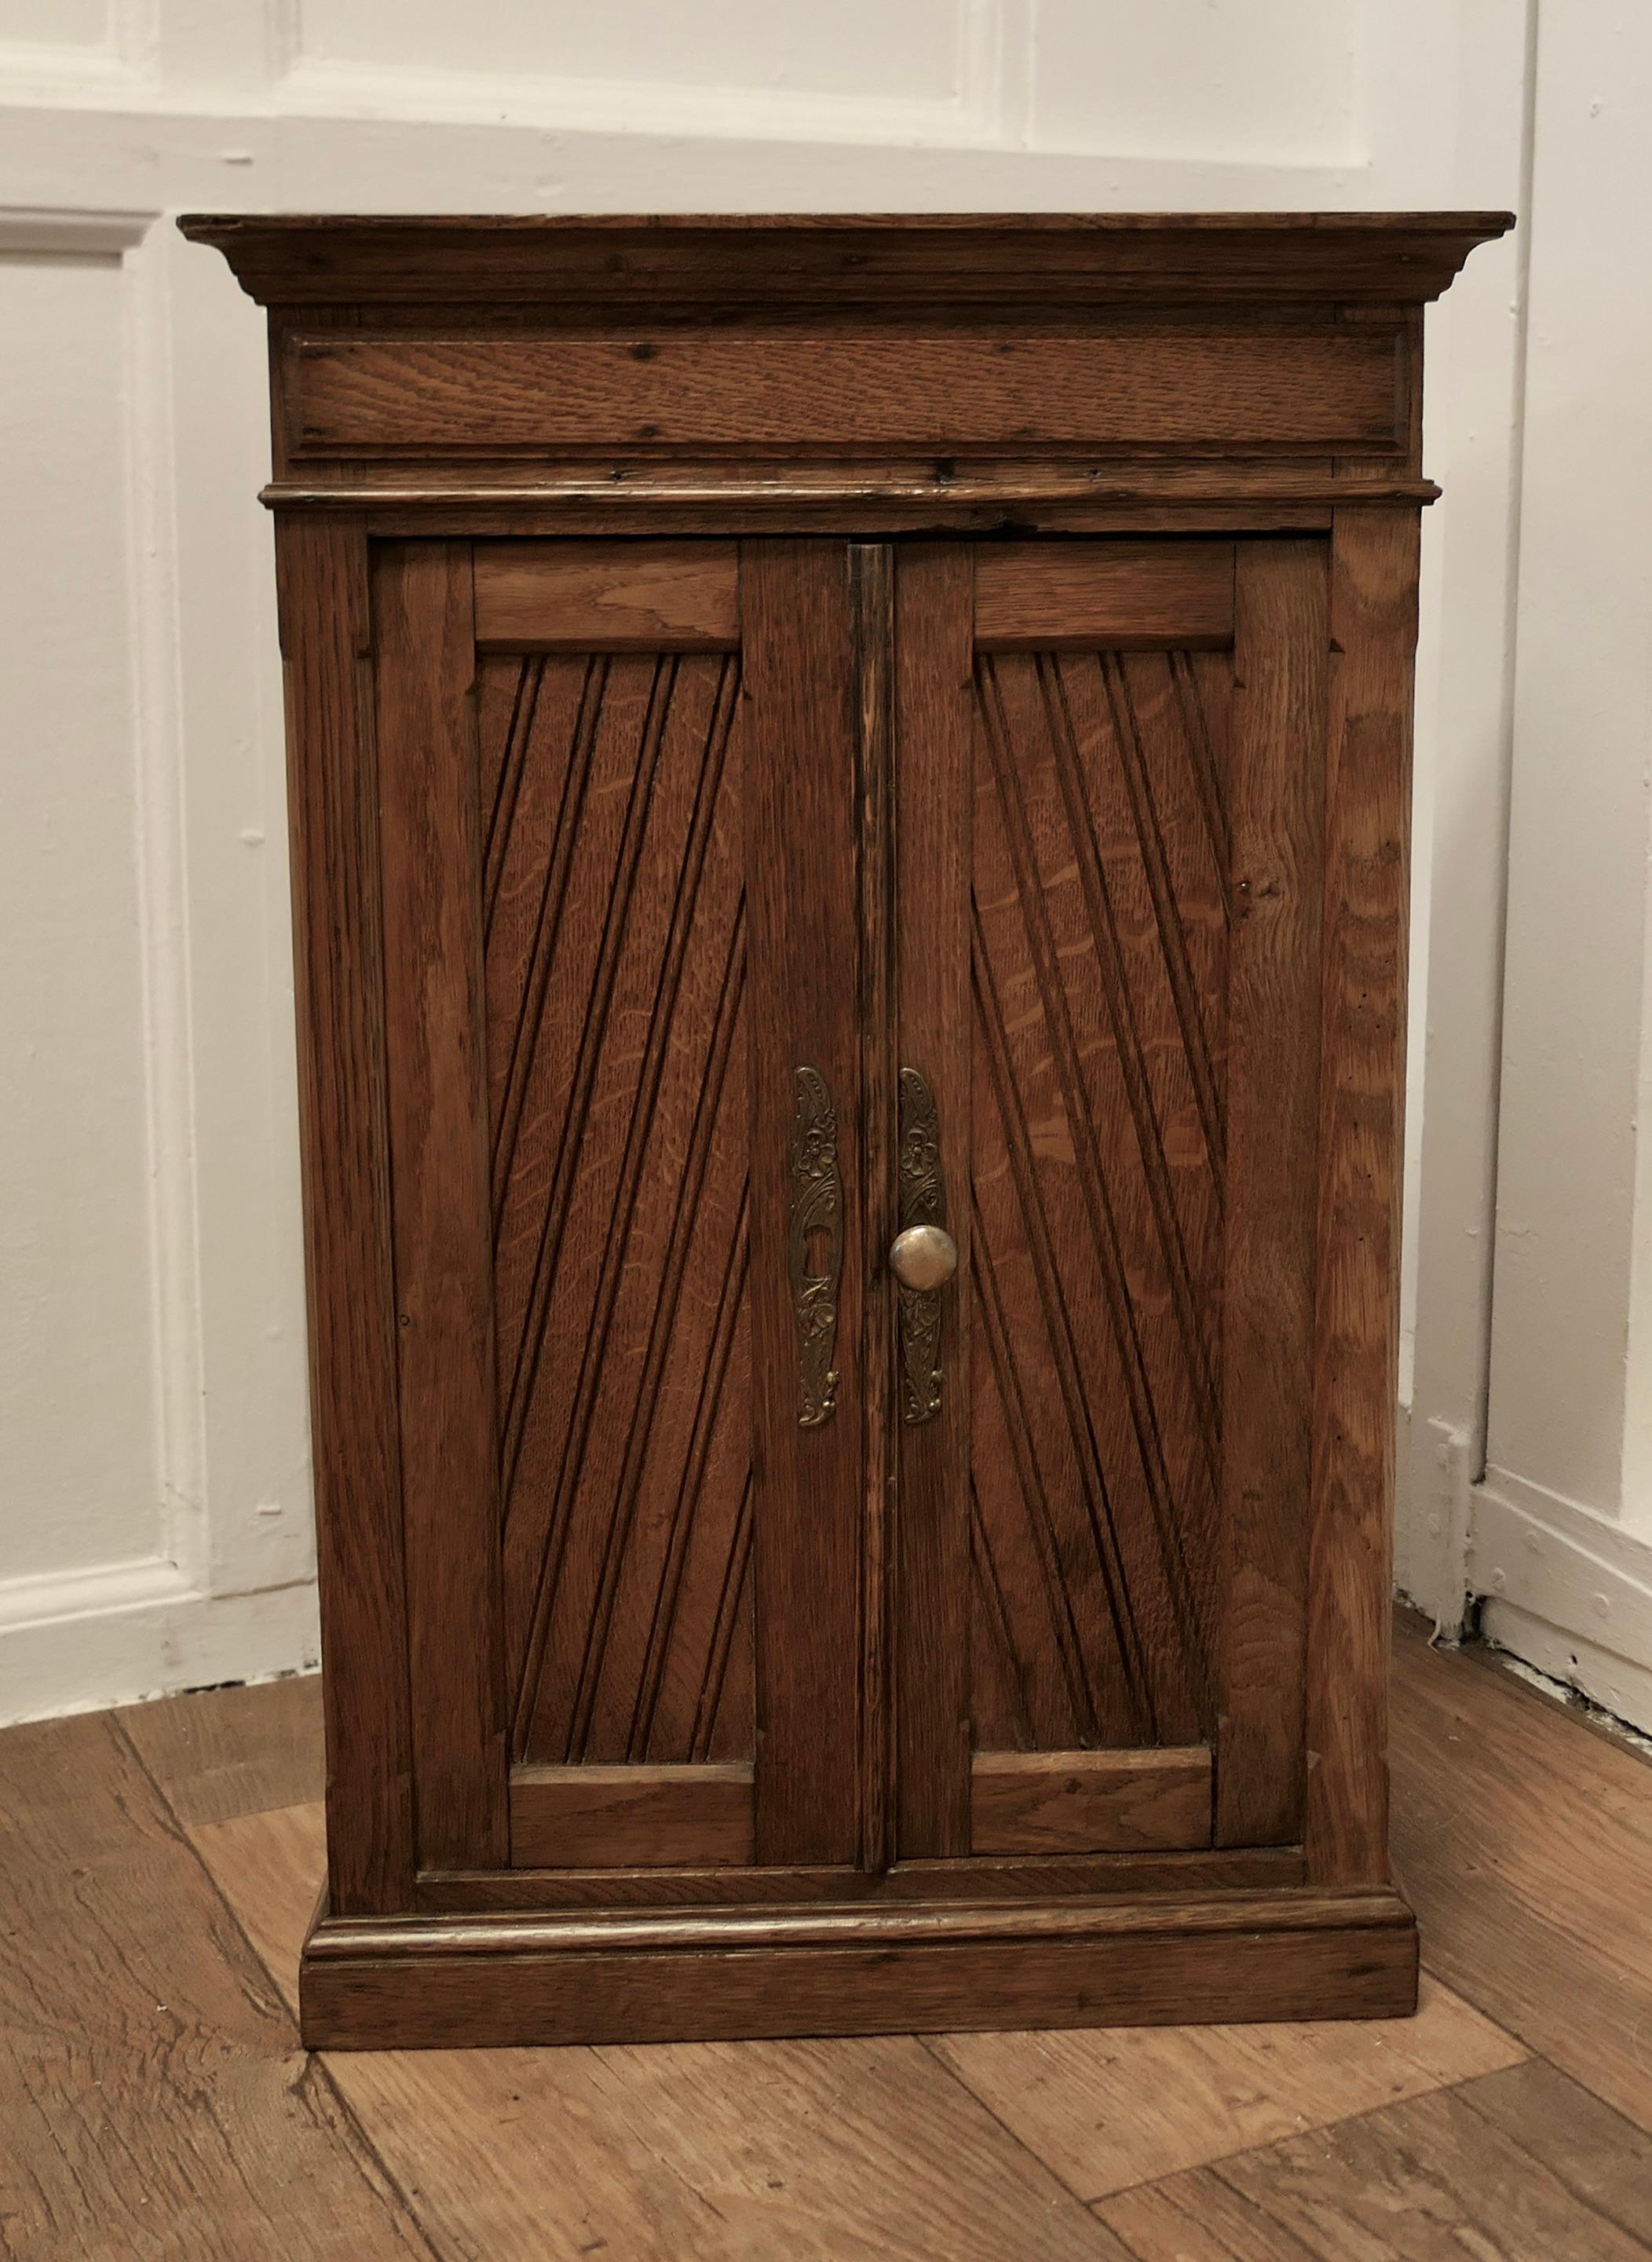 Small Oak 2 Door Cupboard 

This is an unusual piece, the cupboard stands on a small plinth and has diagonal carving to the door panels 
The cupboard has 2 doors and shelves inside, it is quite sound with a good patina
The cupboard is 24” high